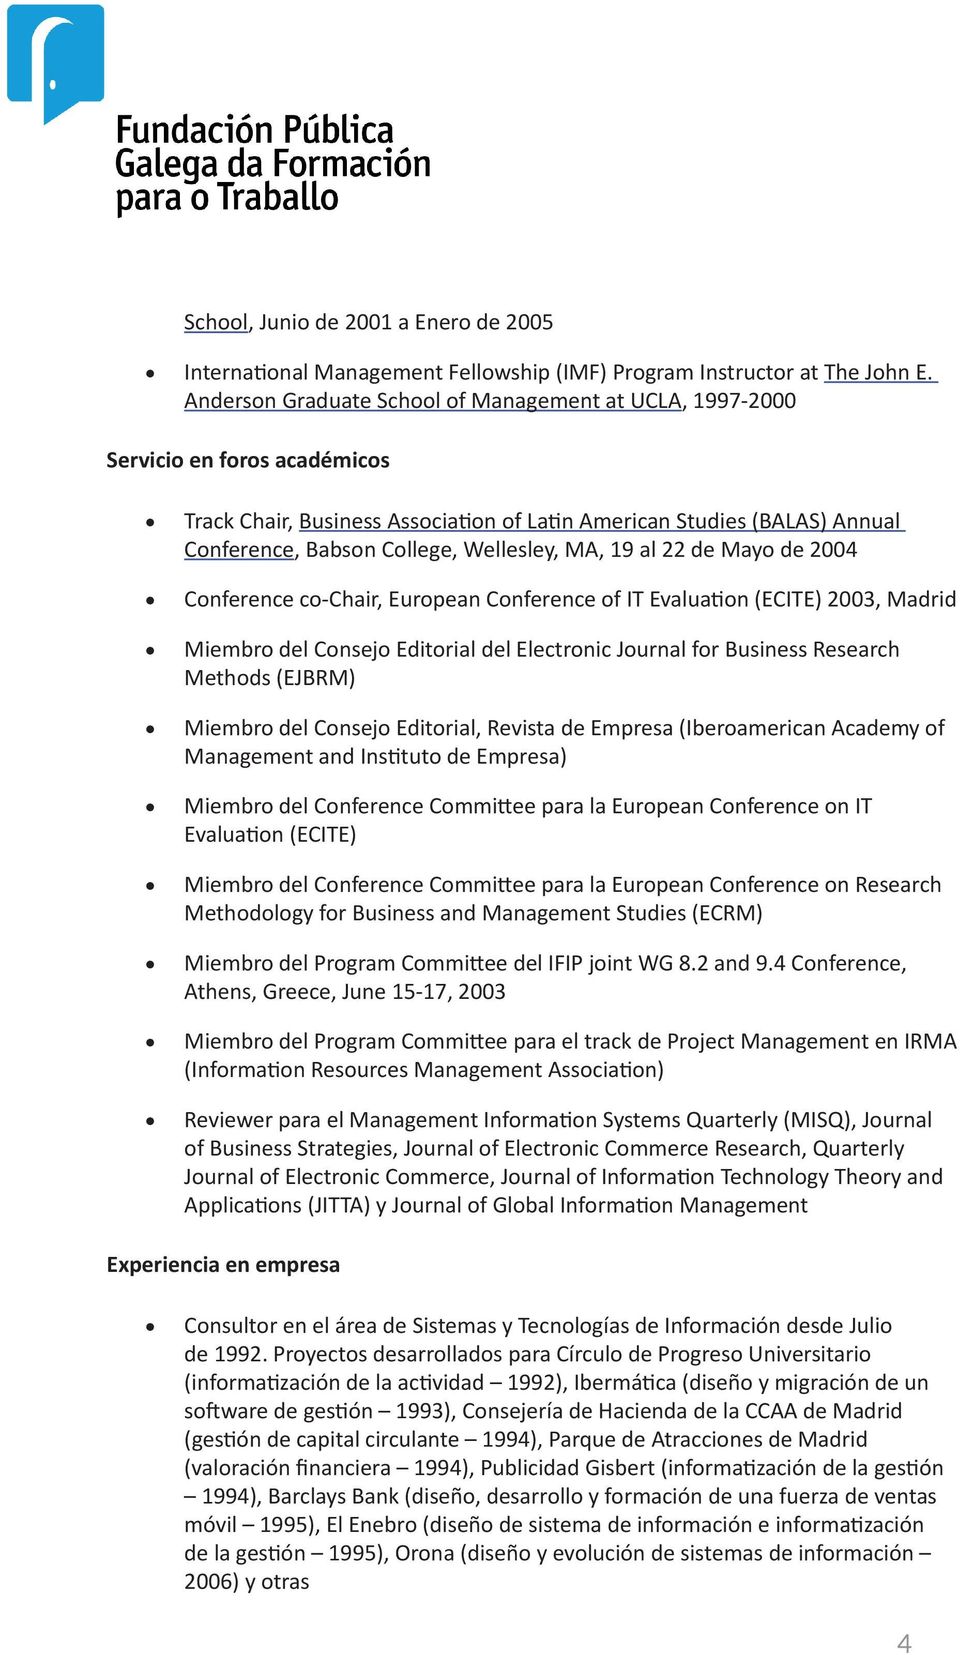 Wellesley, MA, 19 al 22 de Mayo de 2004 Conference co-chair, European Conference of IT Evaluation (ECITE) 2003, Madrid Miembro del Consejo Editorial del Electronic Journal for Business Research